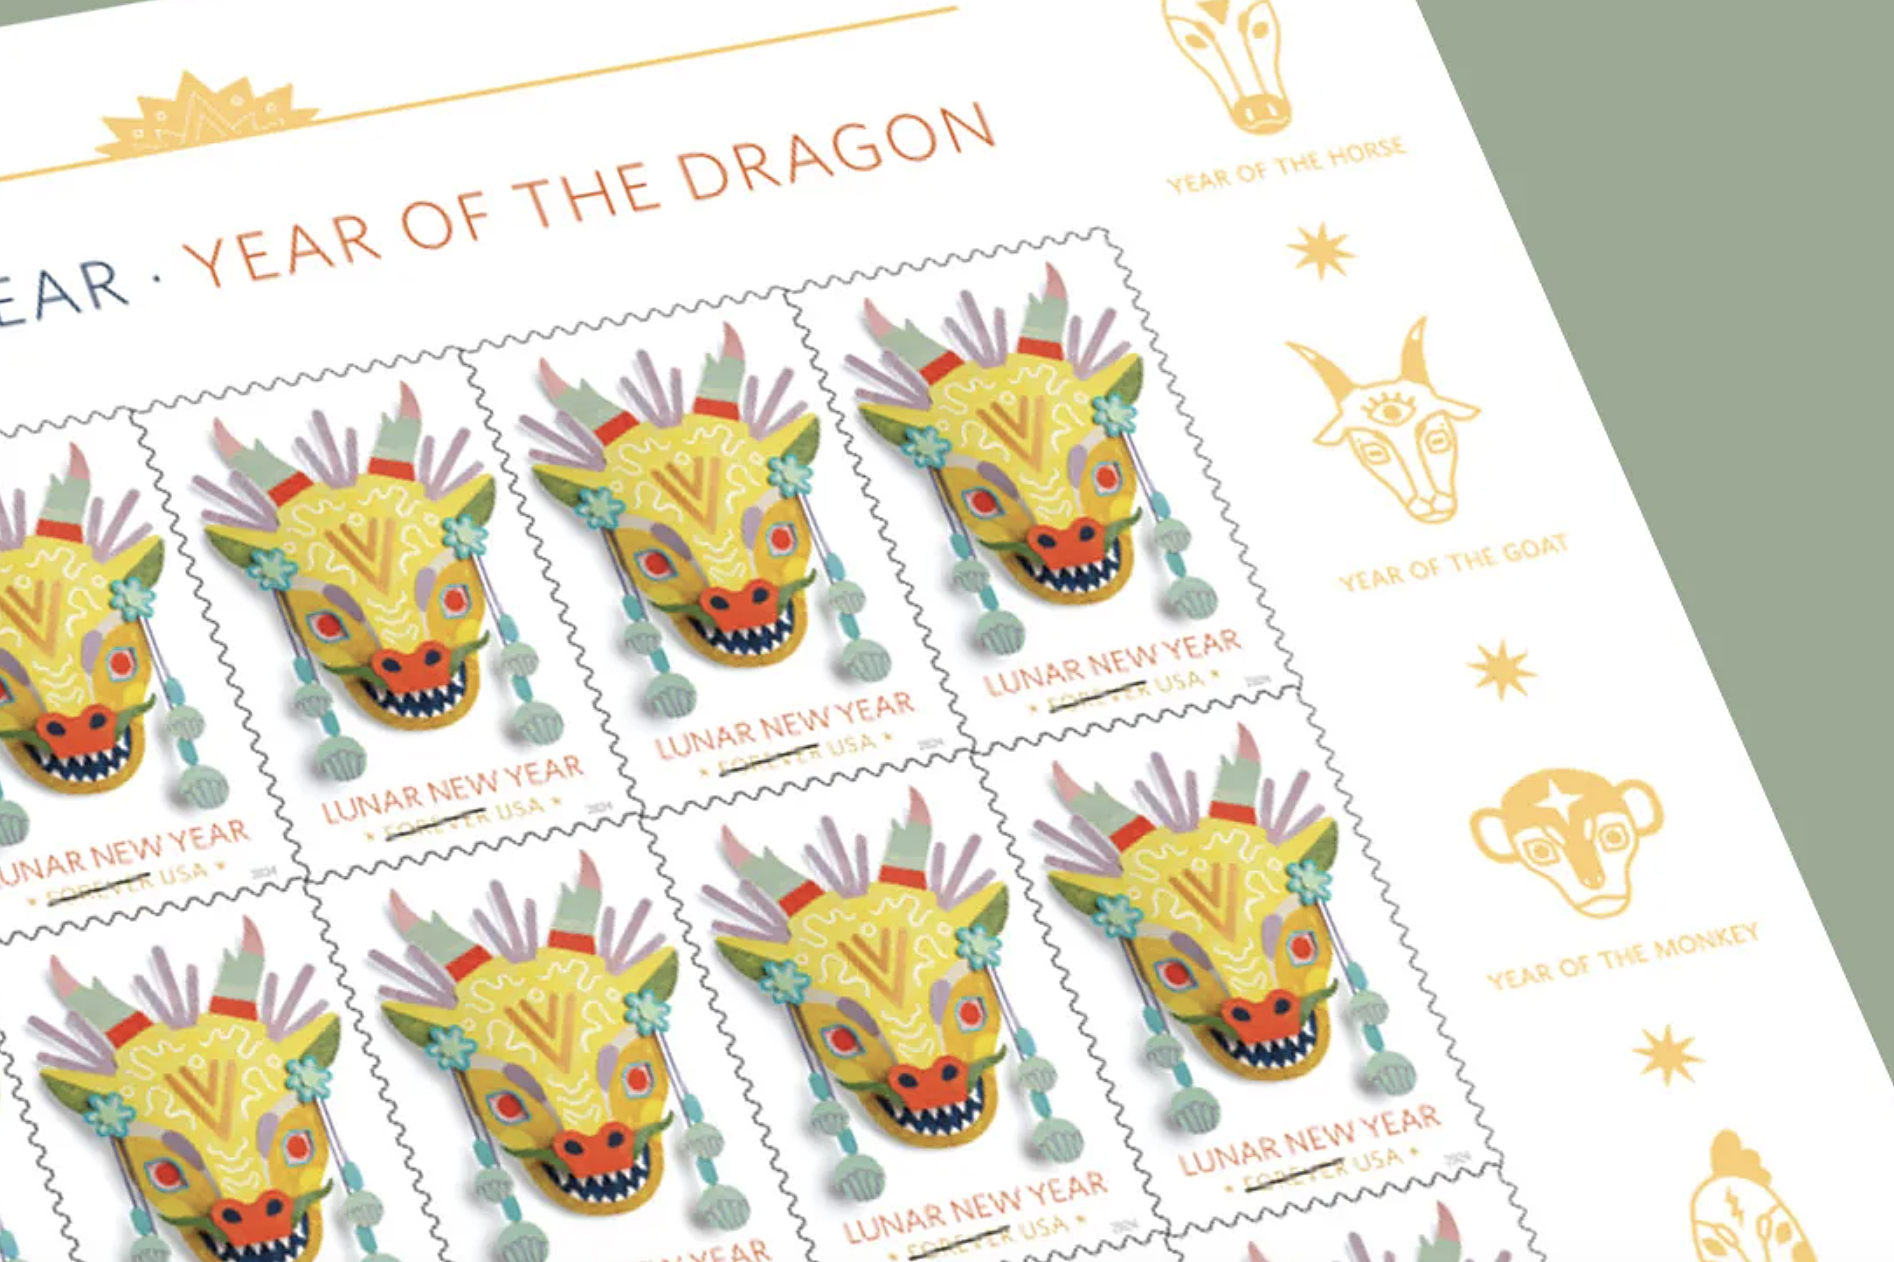 It's a sheet of Lunar New Year stamps with a colorful dragon mask design and zodiac animal icons on the right edge.